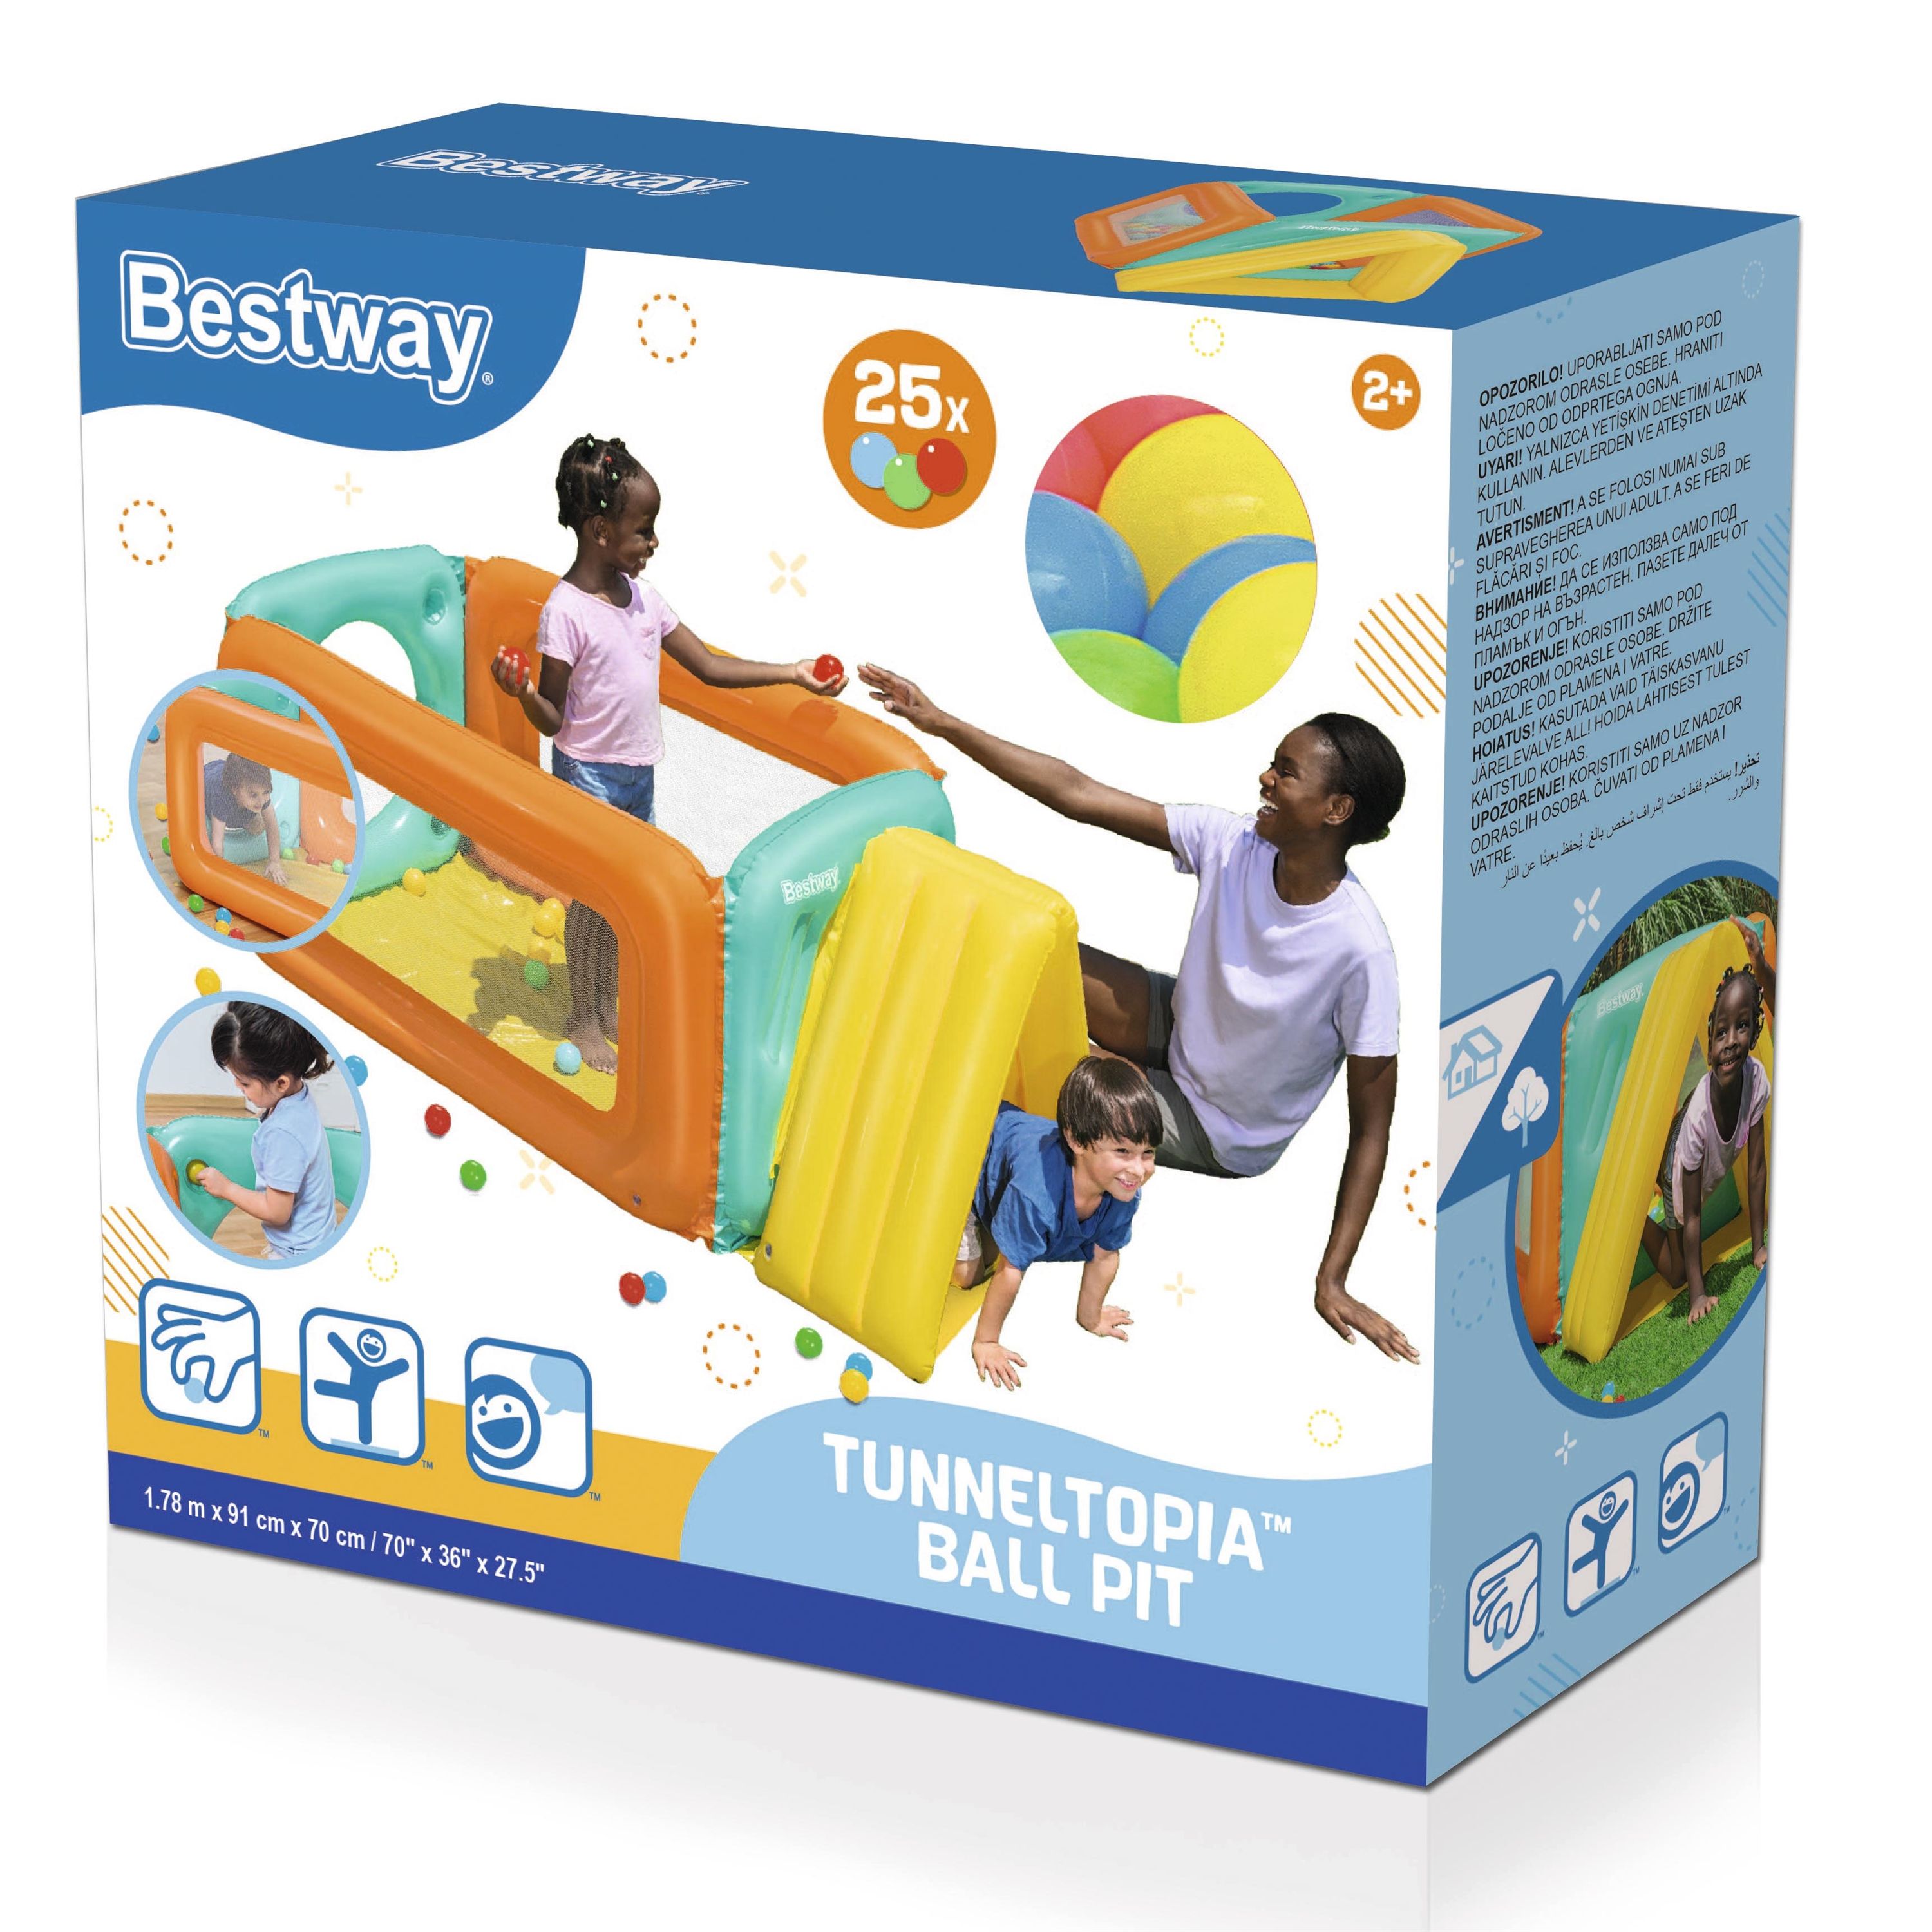 Bestway Multicolour Inflatable Outdoor Ball pit